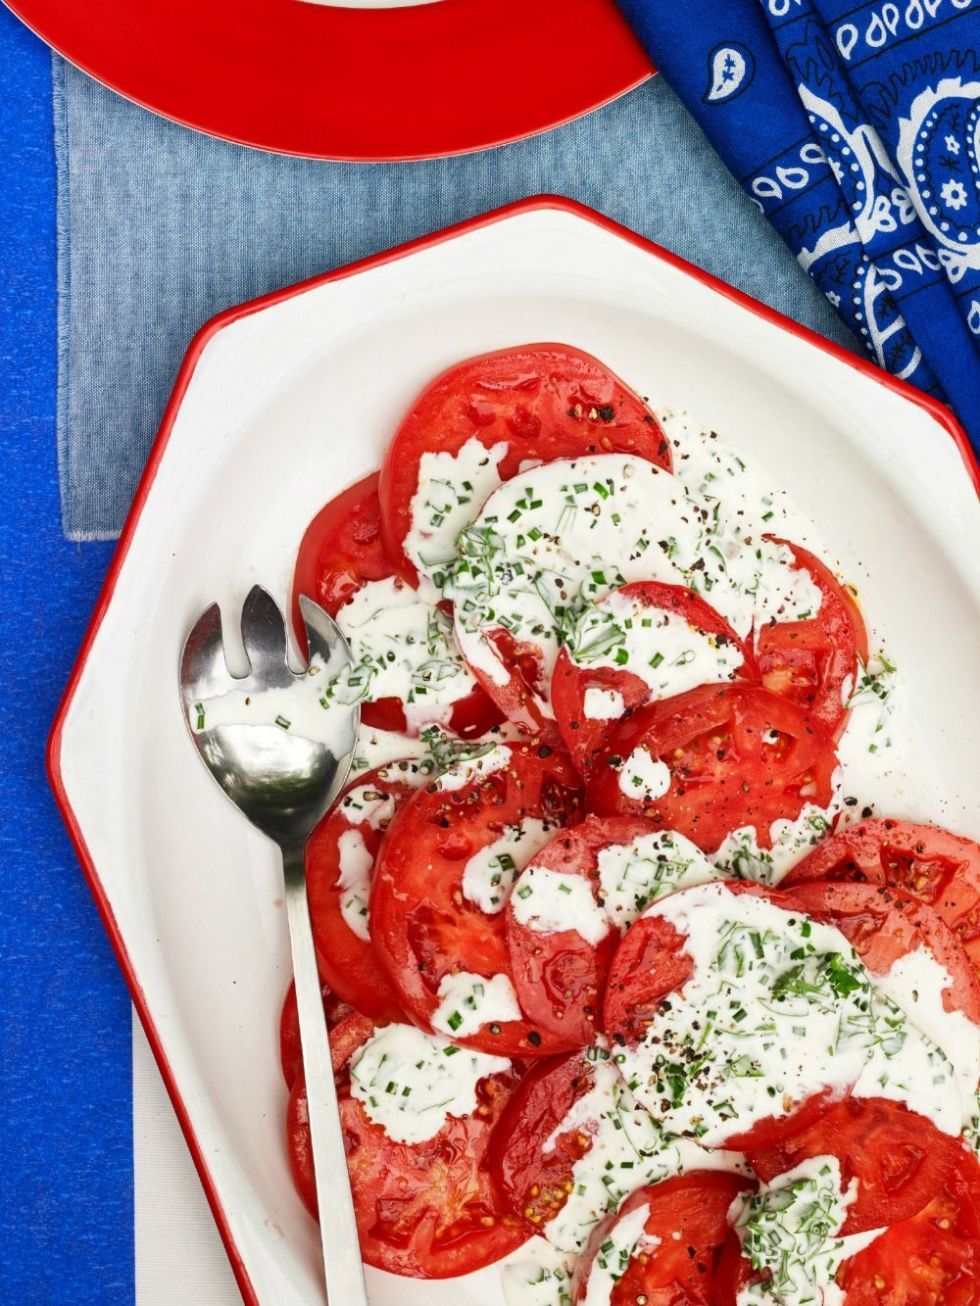 bbq side dishes   tomatoes with green goddess dressing